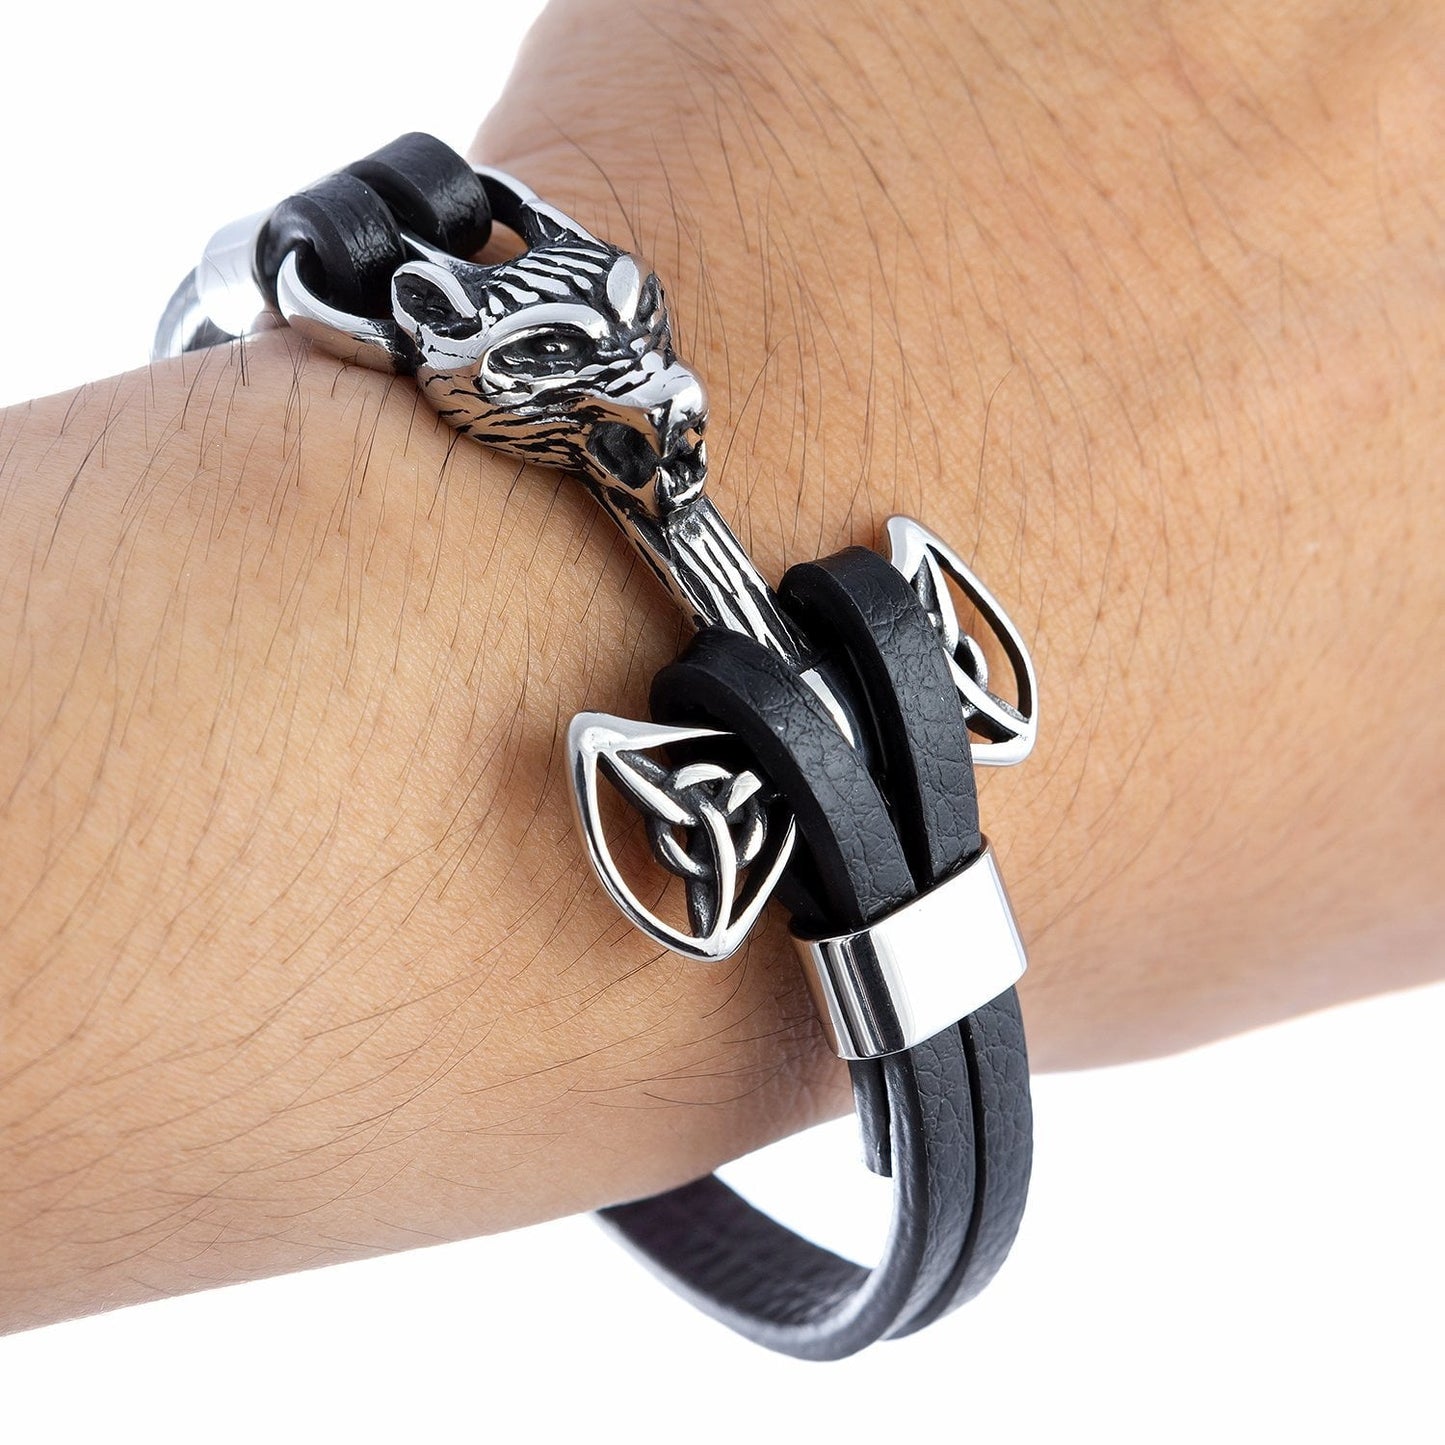 Stainless Steel Viking Mjolnir Black Leather Bracelet with Wolf - SilverMania925